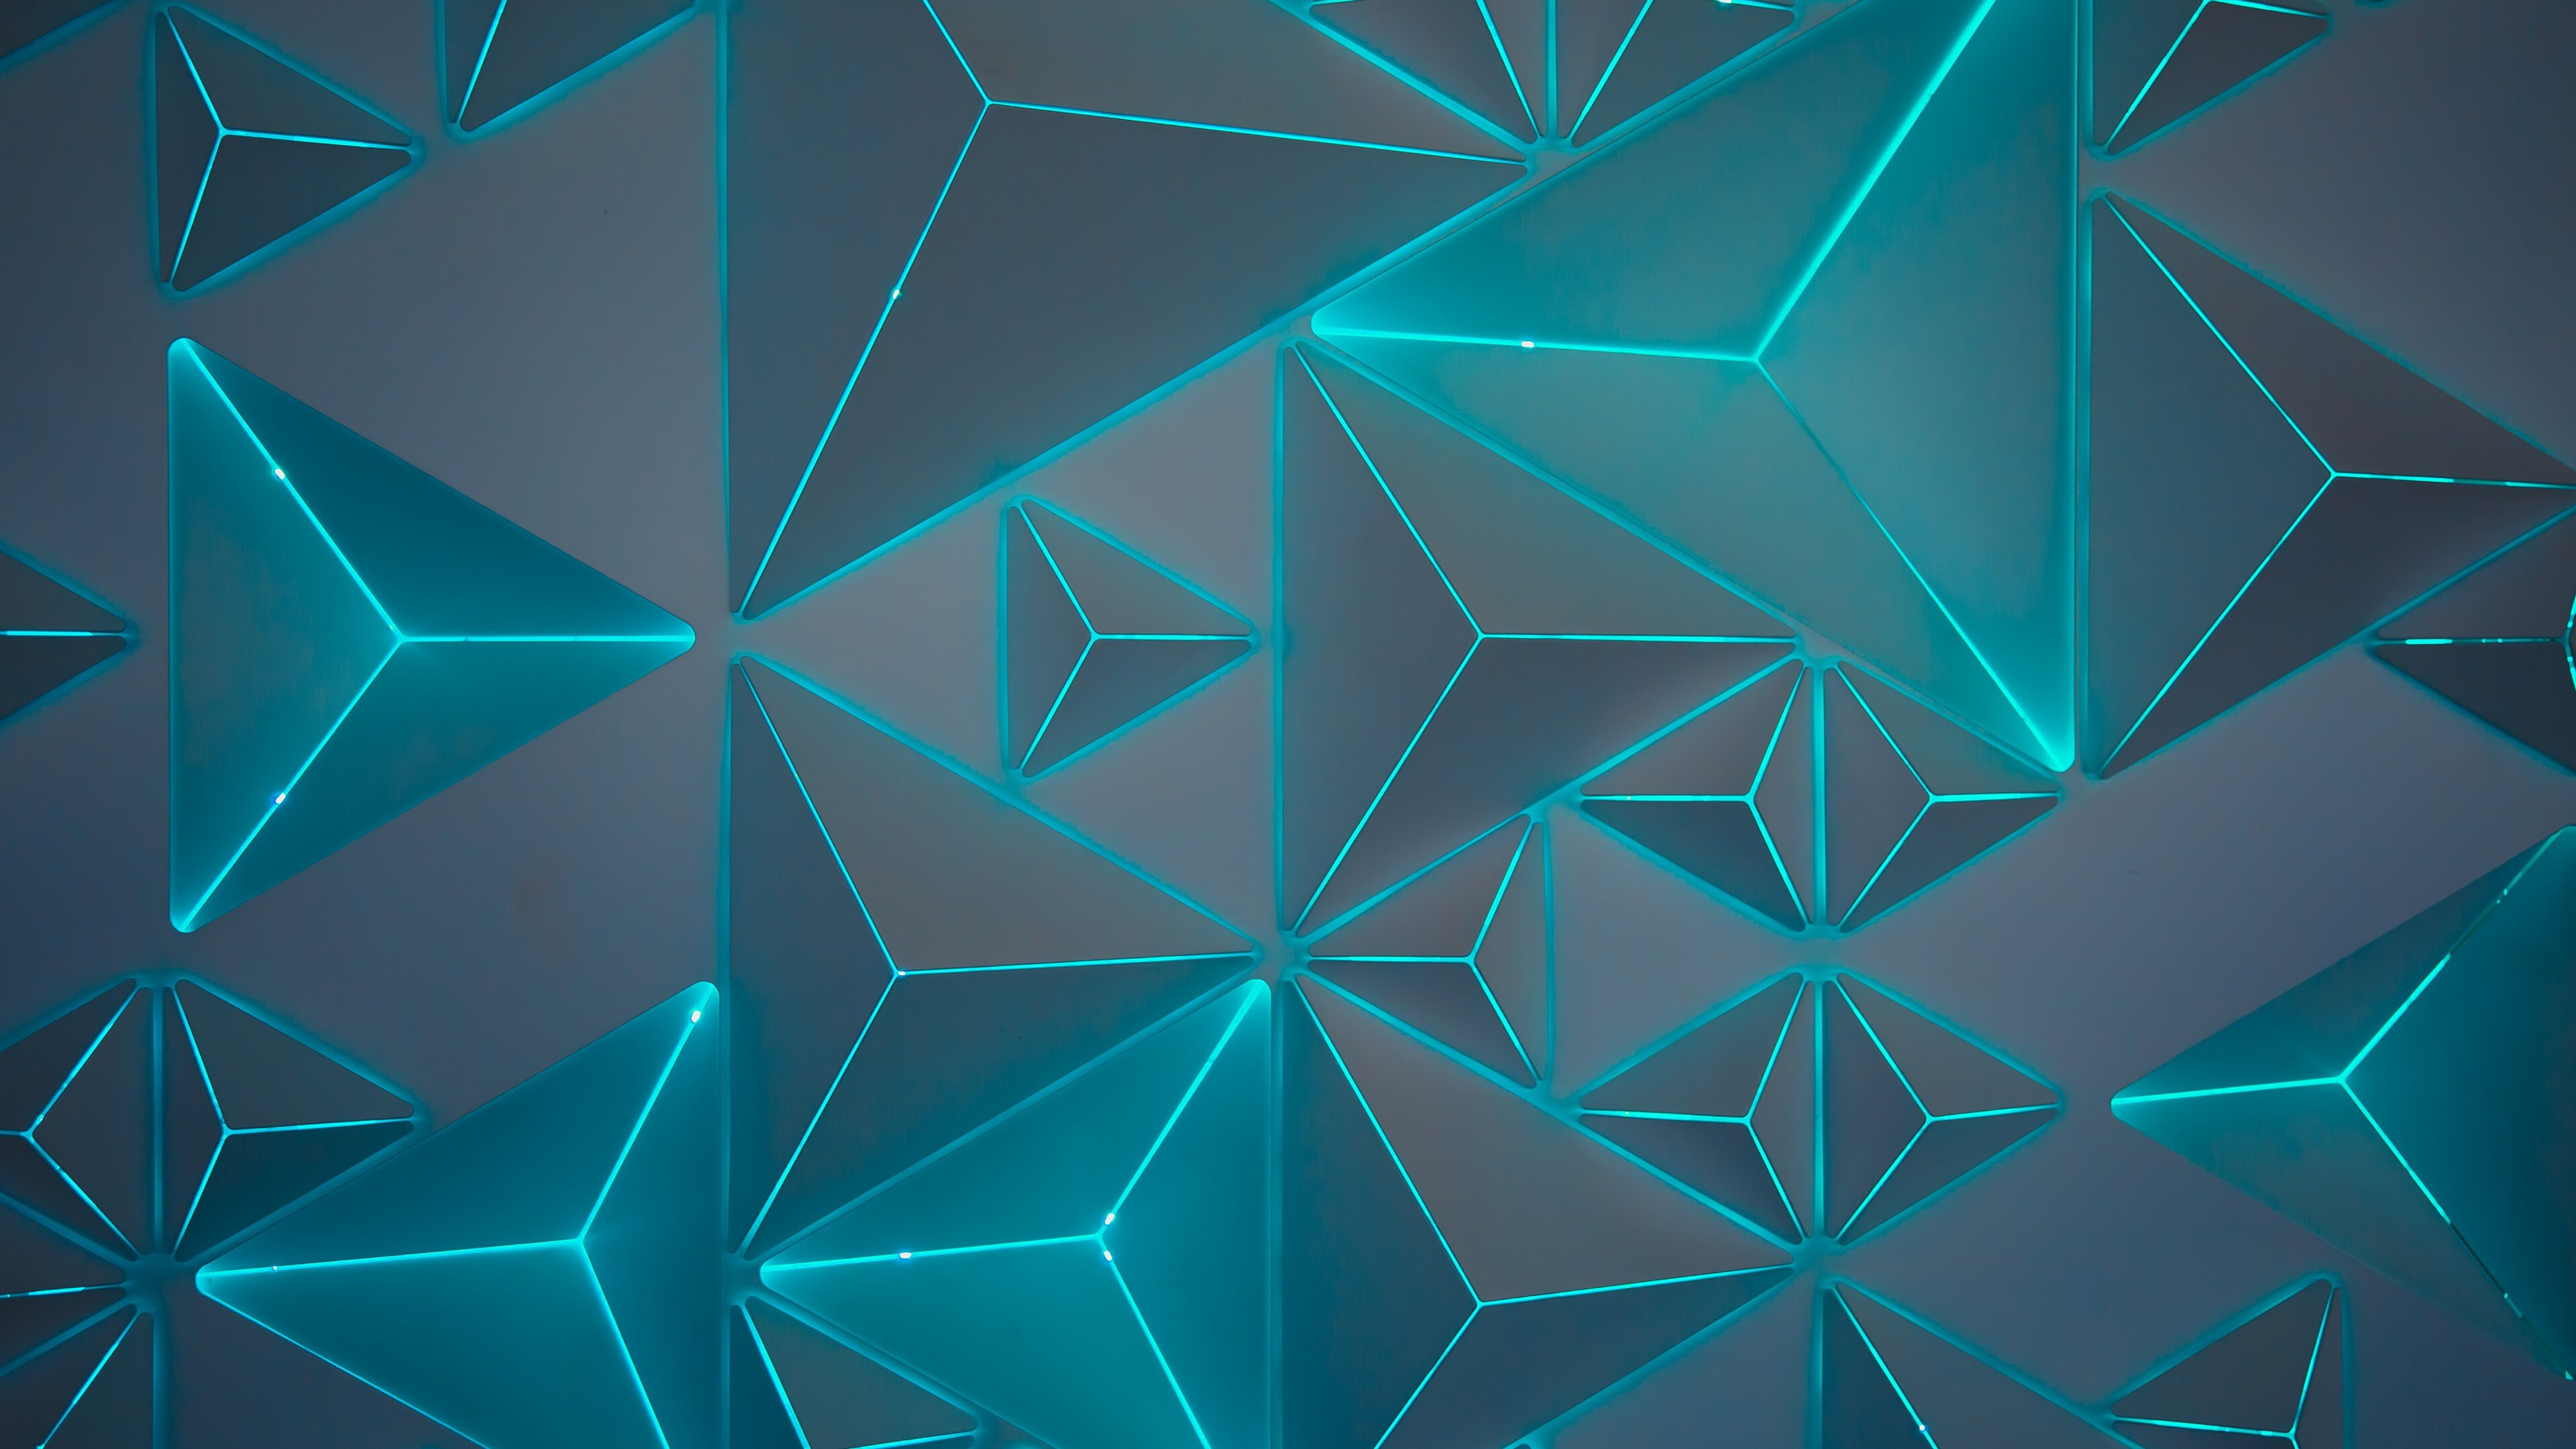 Triangle: Neon light, Intersecting lines, Pyramids, Reflex angles. 3840x2160 4K Background.